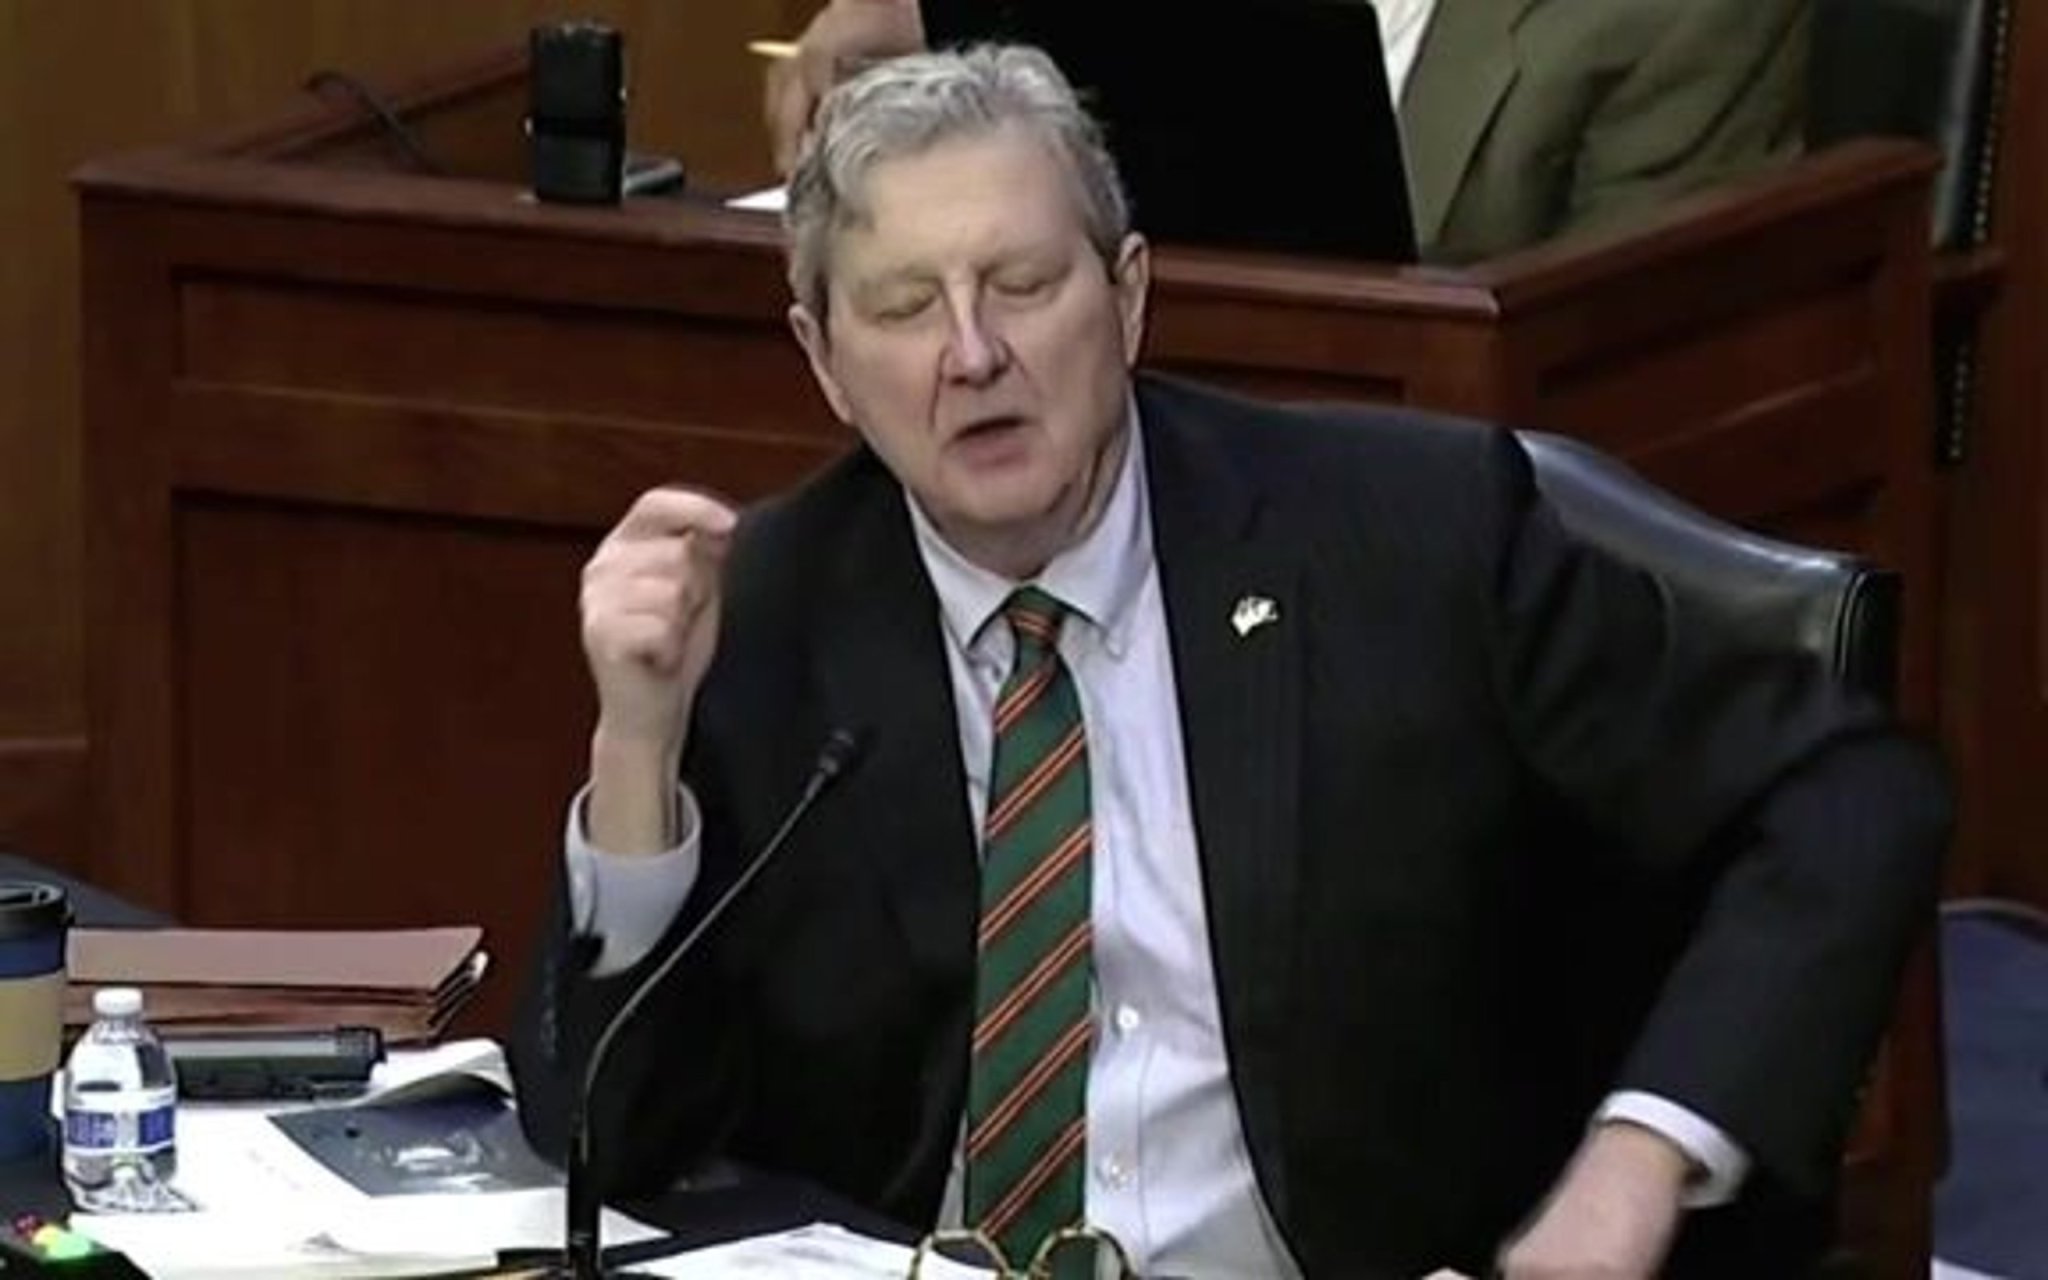 Sen. John Kennedy (R-LA) goes off on Fed Chair Jerome Powell during hearing.